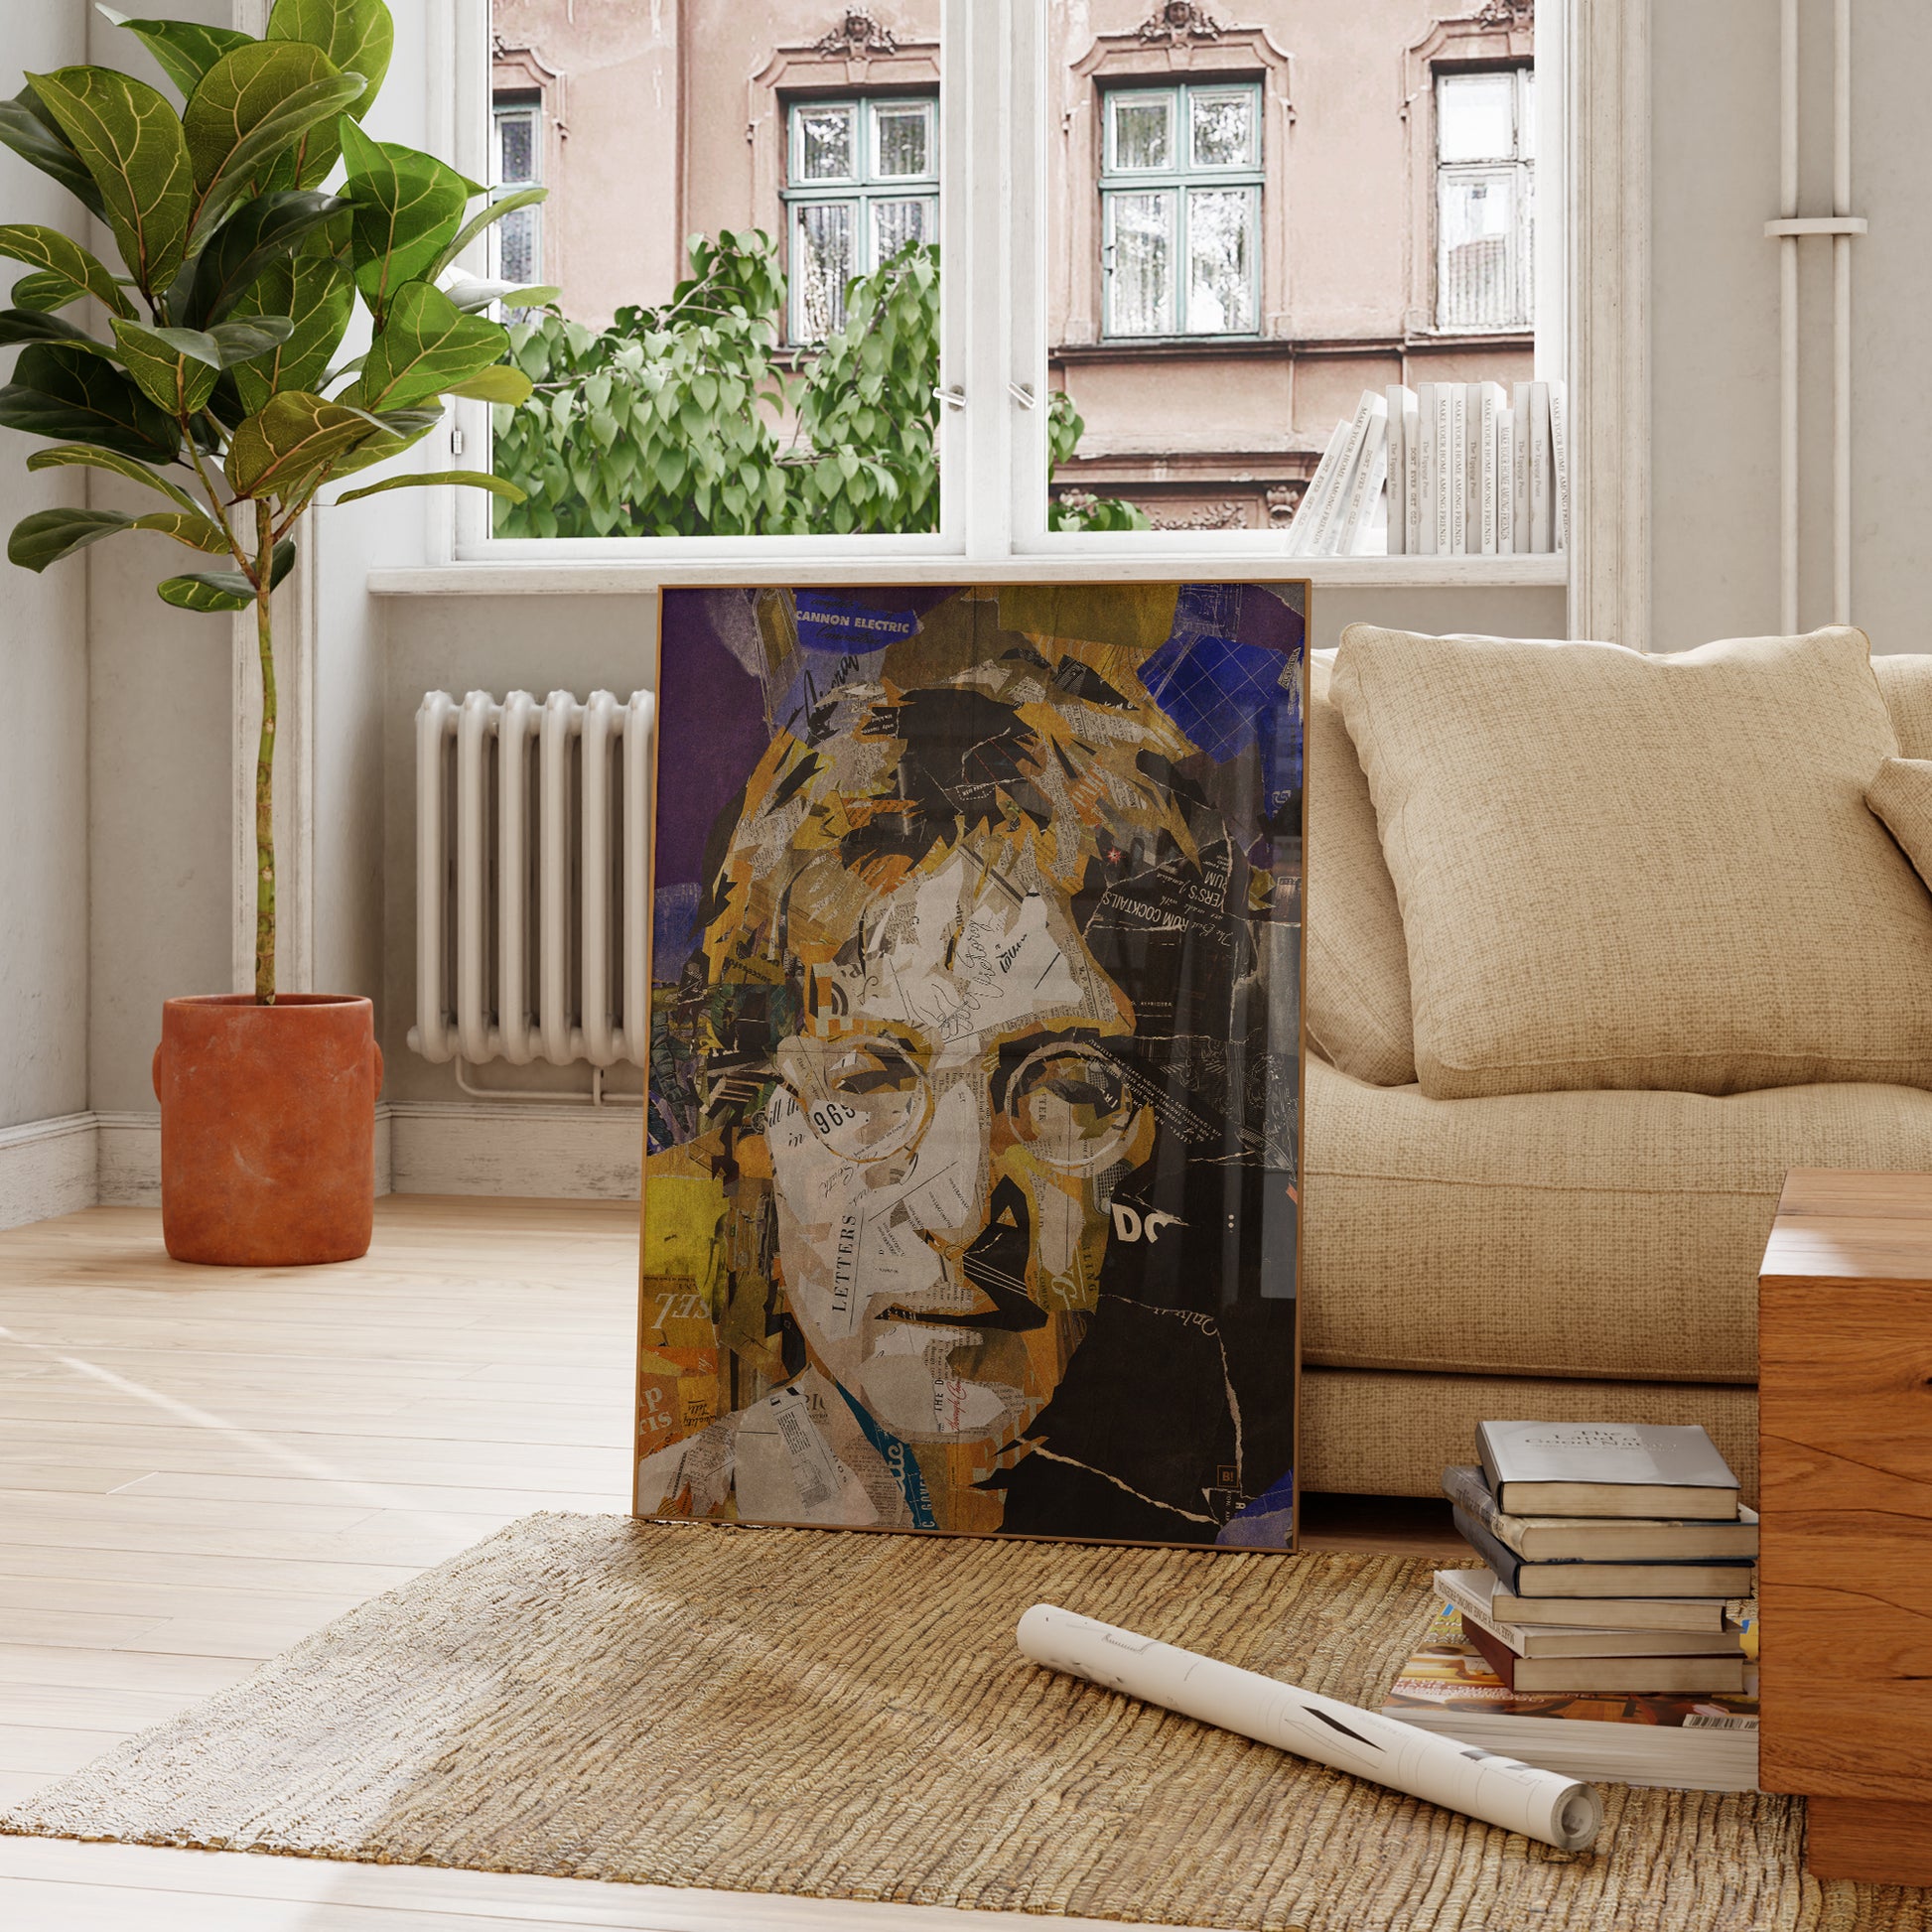 Be inspired by our iconic collage portrait art print of John Lennon. This artwork was printed using the giclée process on archival acid-free paper and is presented in a French living room, capturing its timeless beauty in every detail.